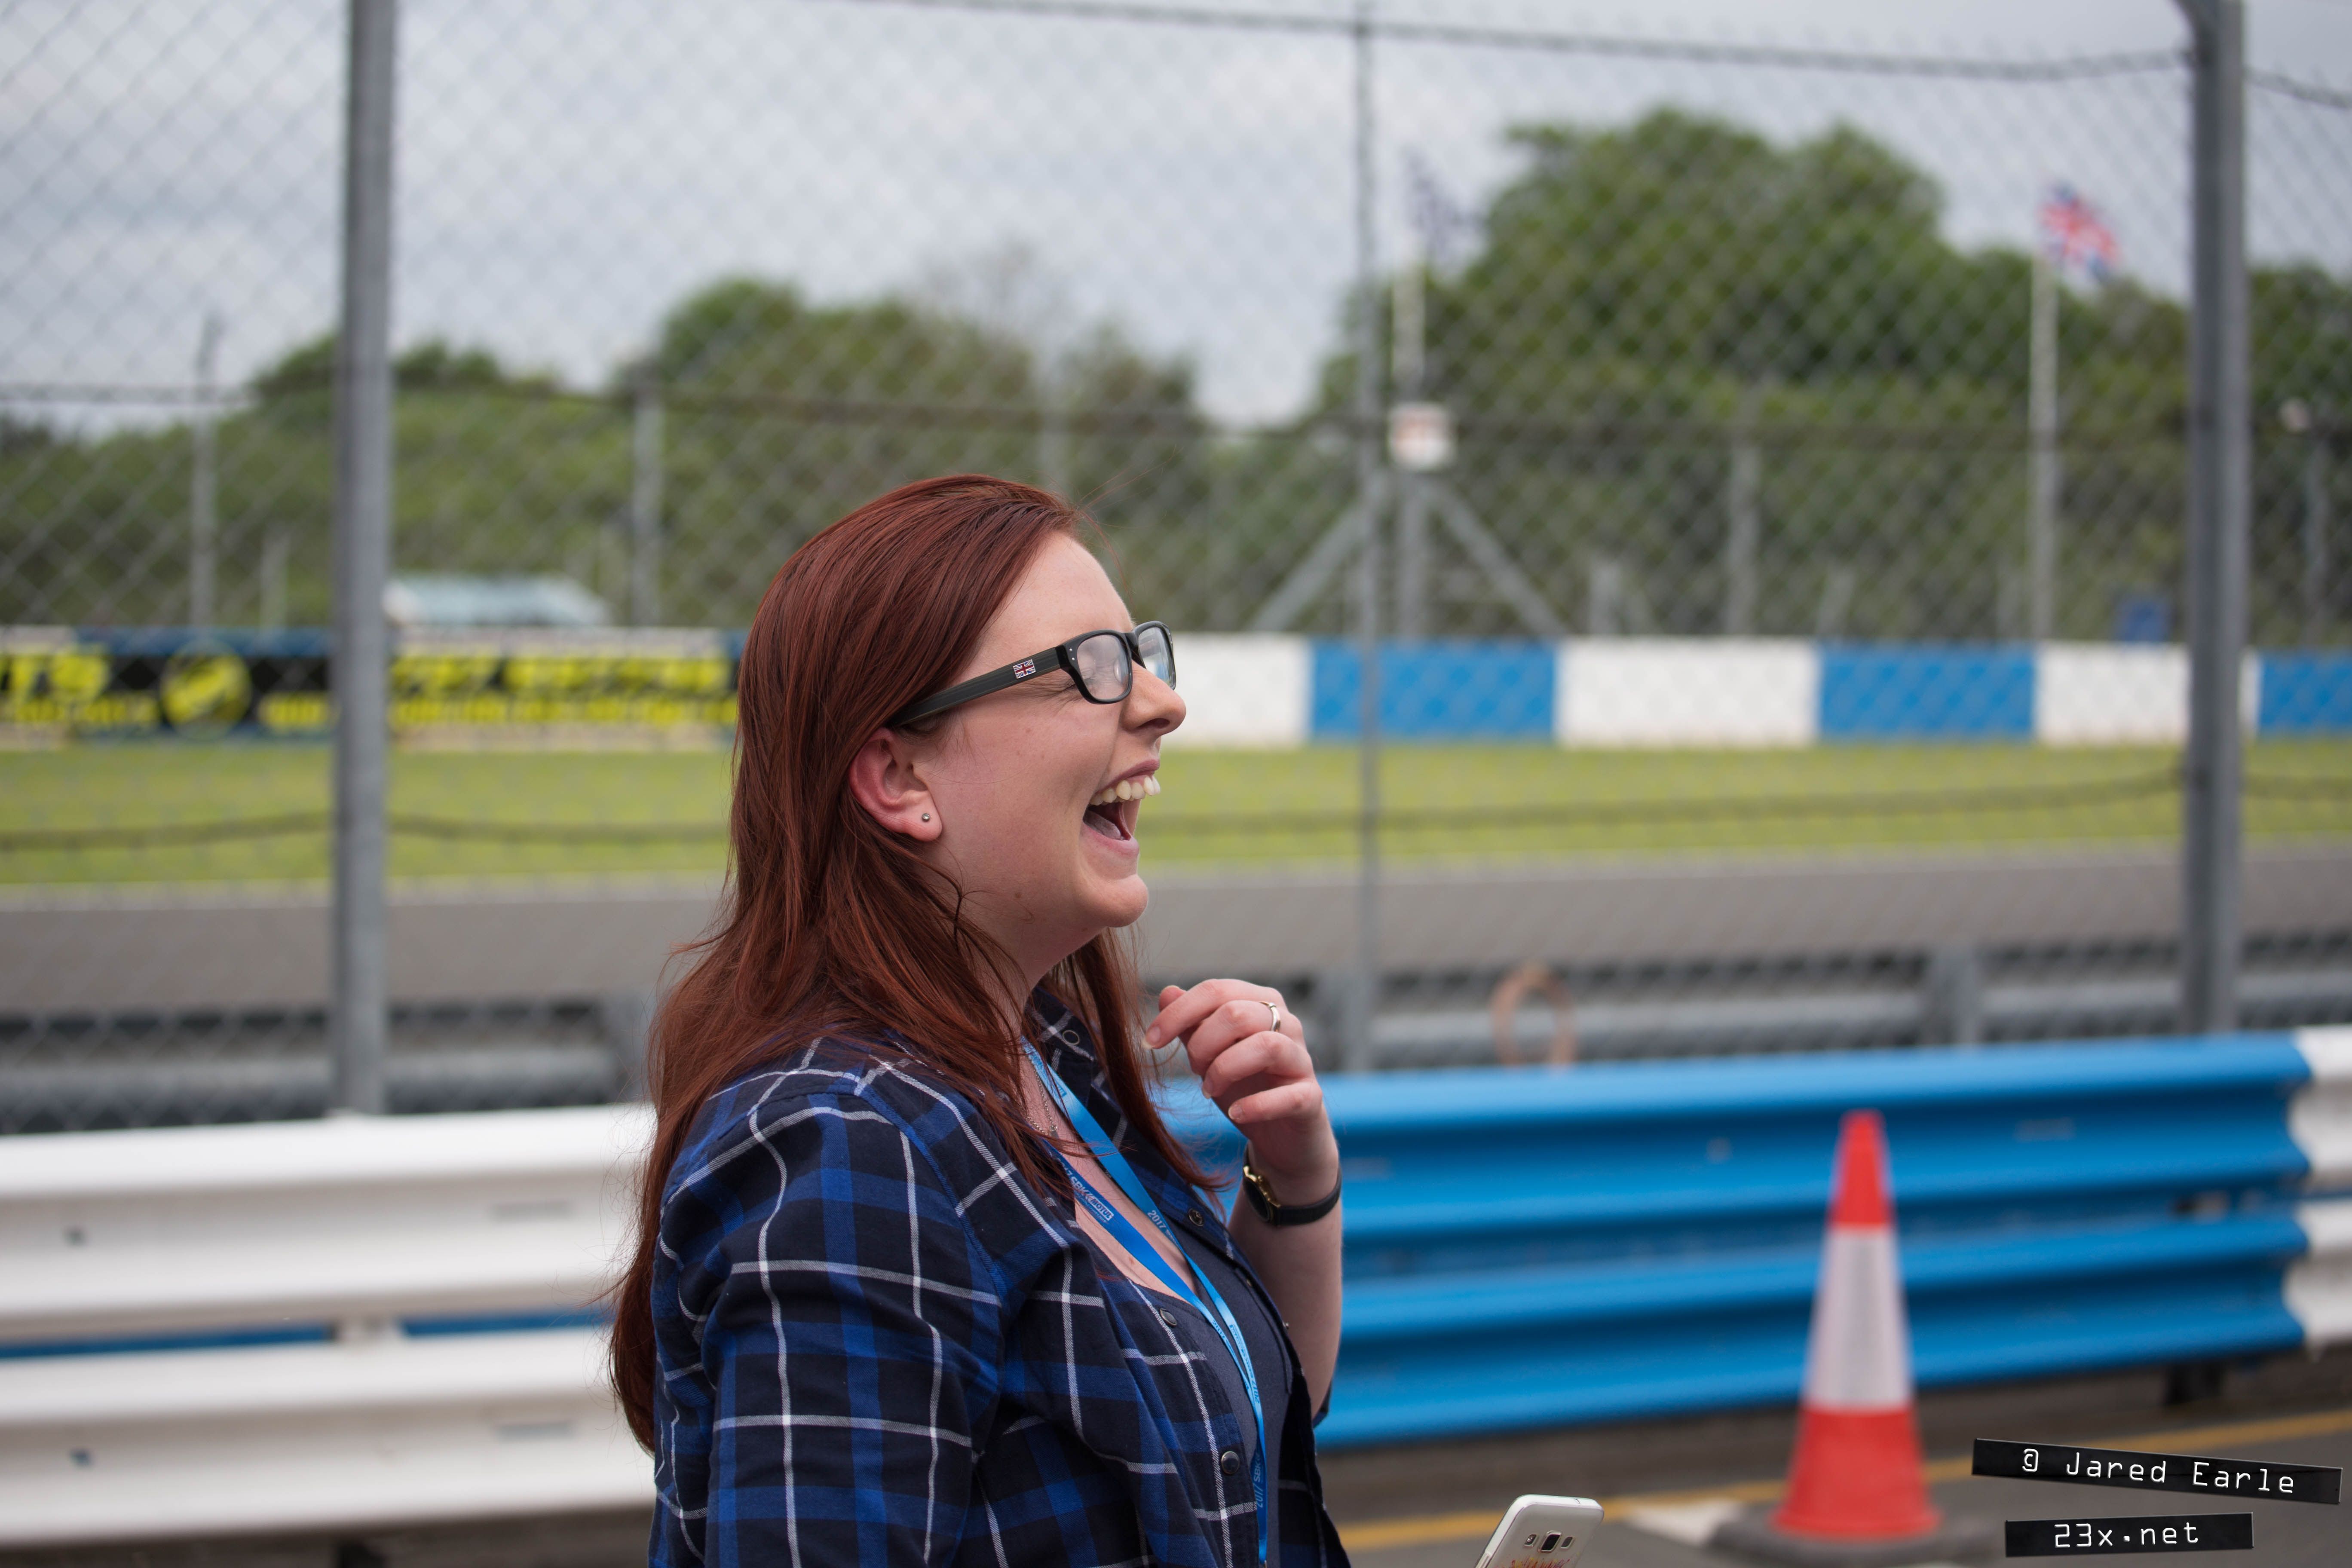 In case you've ever wondered how happy you will be when stepping out of the safety car! Photo: @jearle on Twitter.